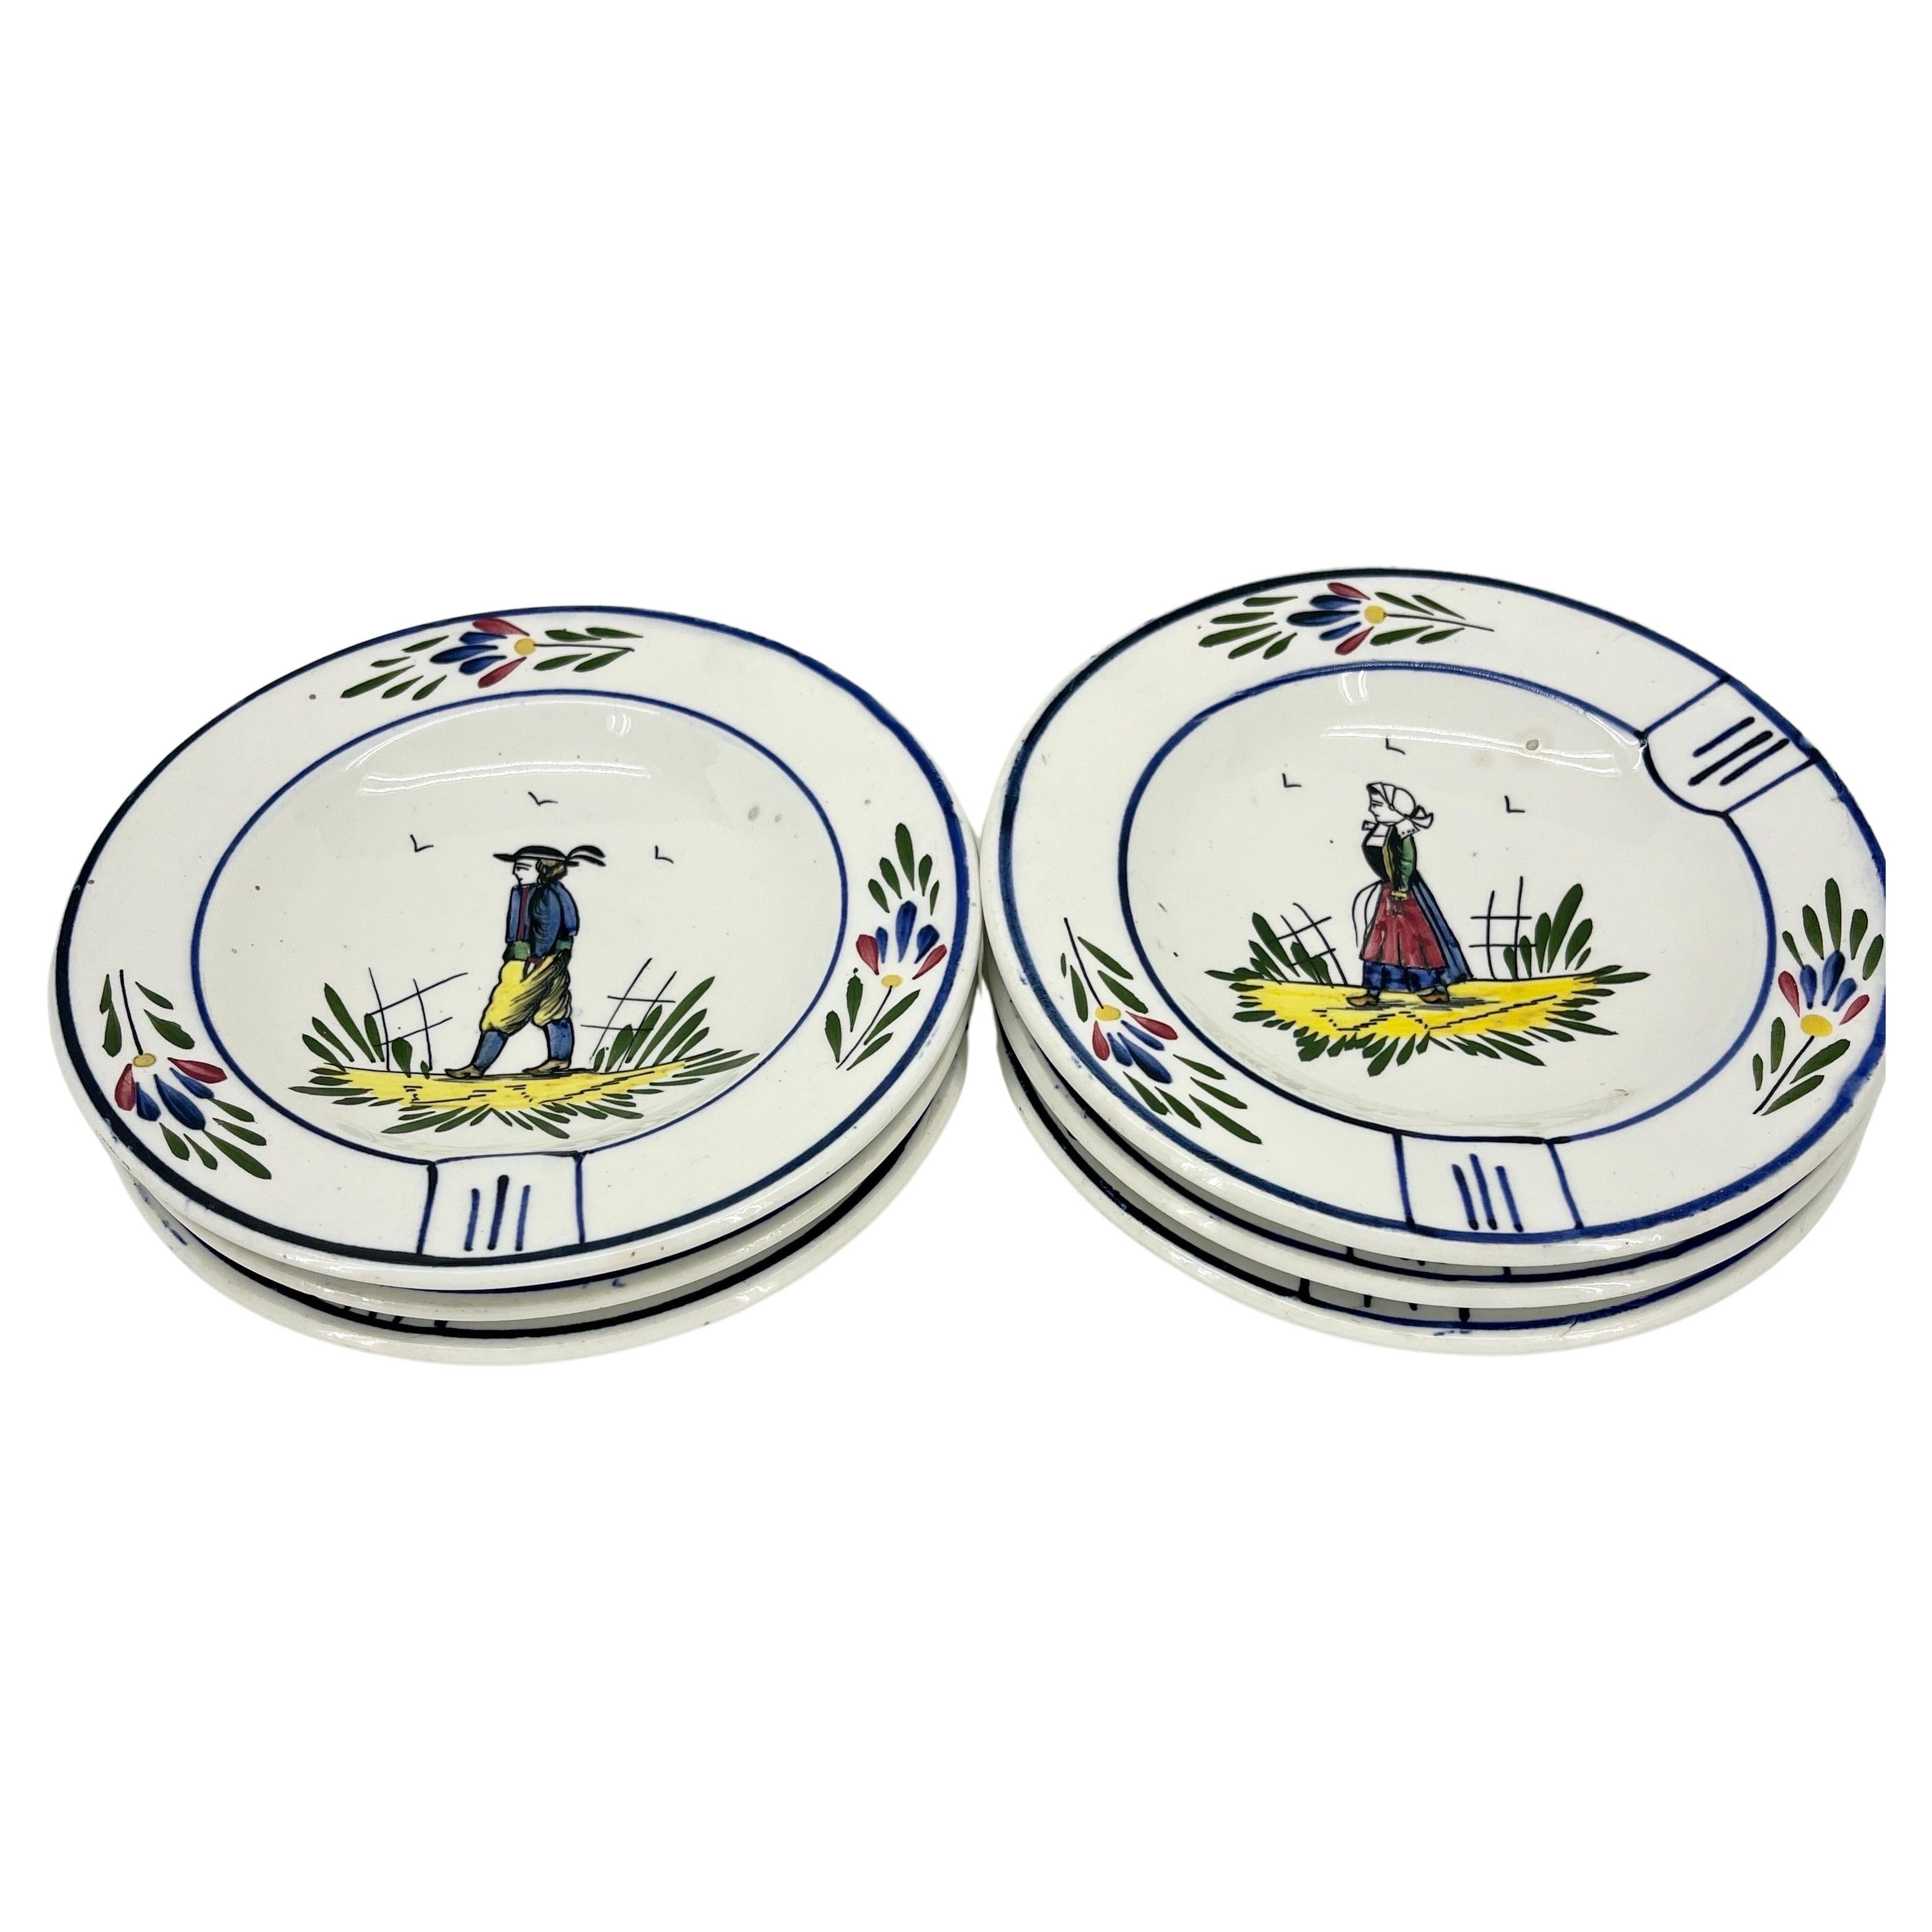 Marked P.V. Set Of Six Faience French Plates

Charming set of 6 French Provincial Faience plates. Each with scenes of man and woman. Labeled on back P.V. Made in France. Wonderful collection of plates with many uses including display, jewelry